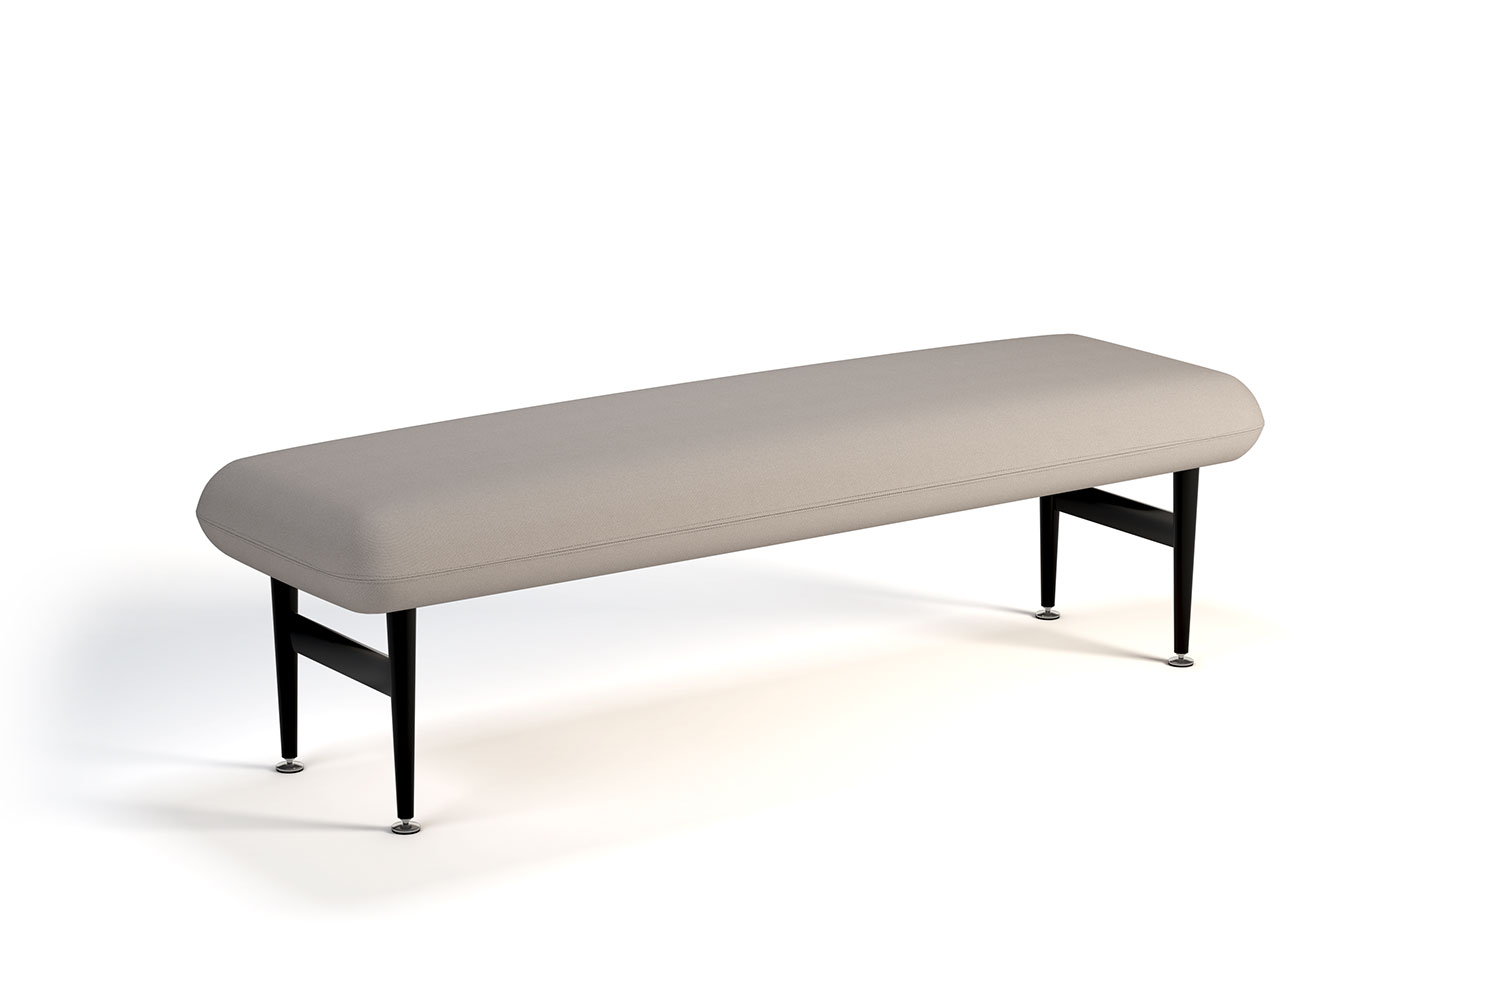 Nikki 60 in Two Seat Straight Bench